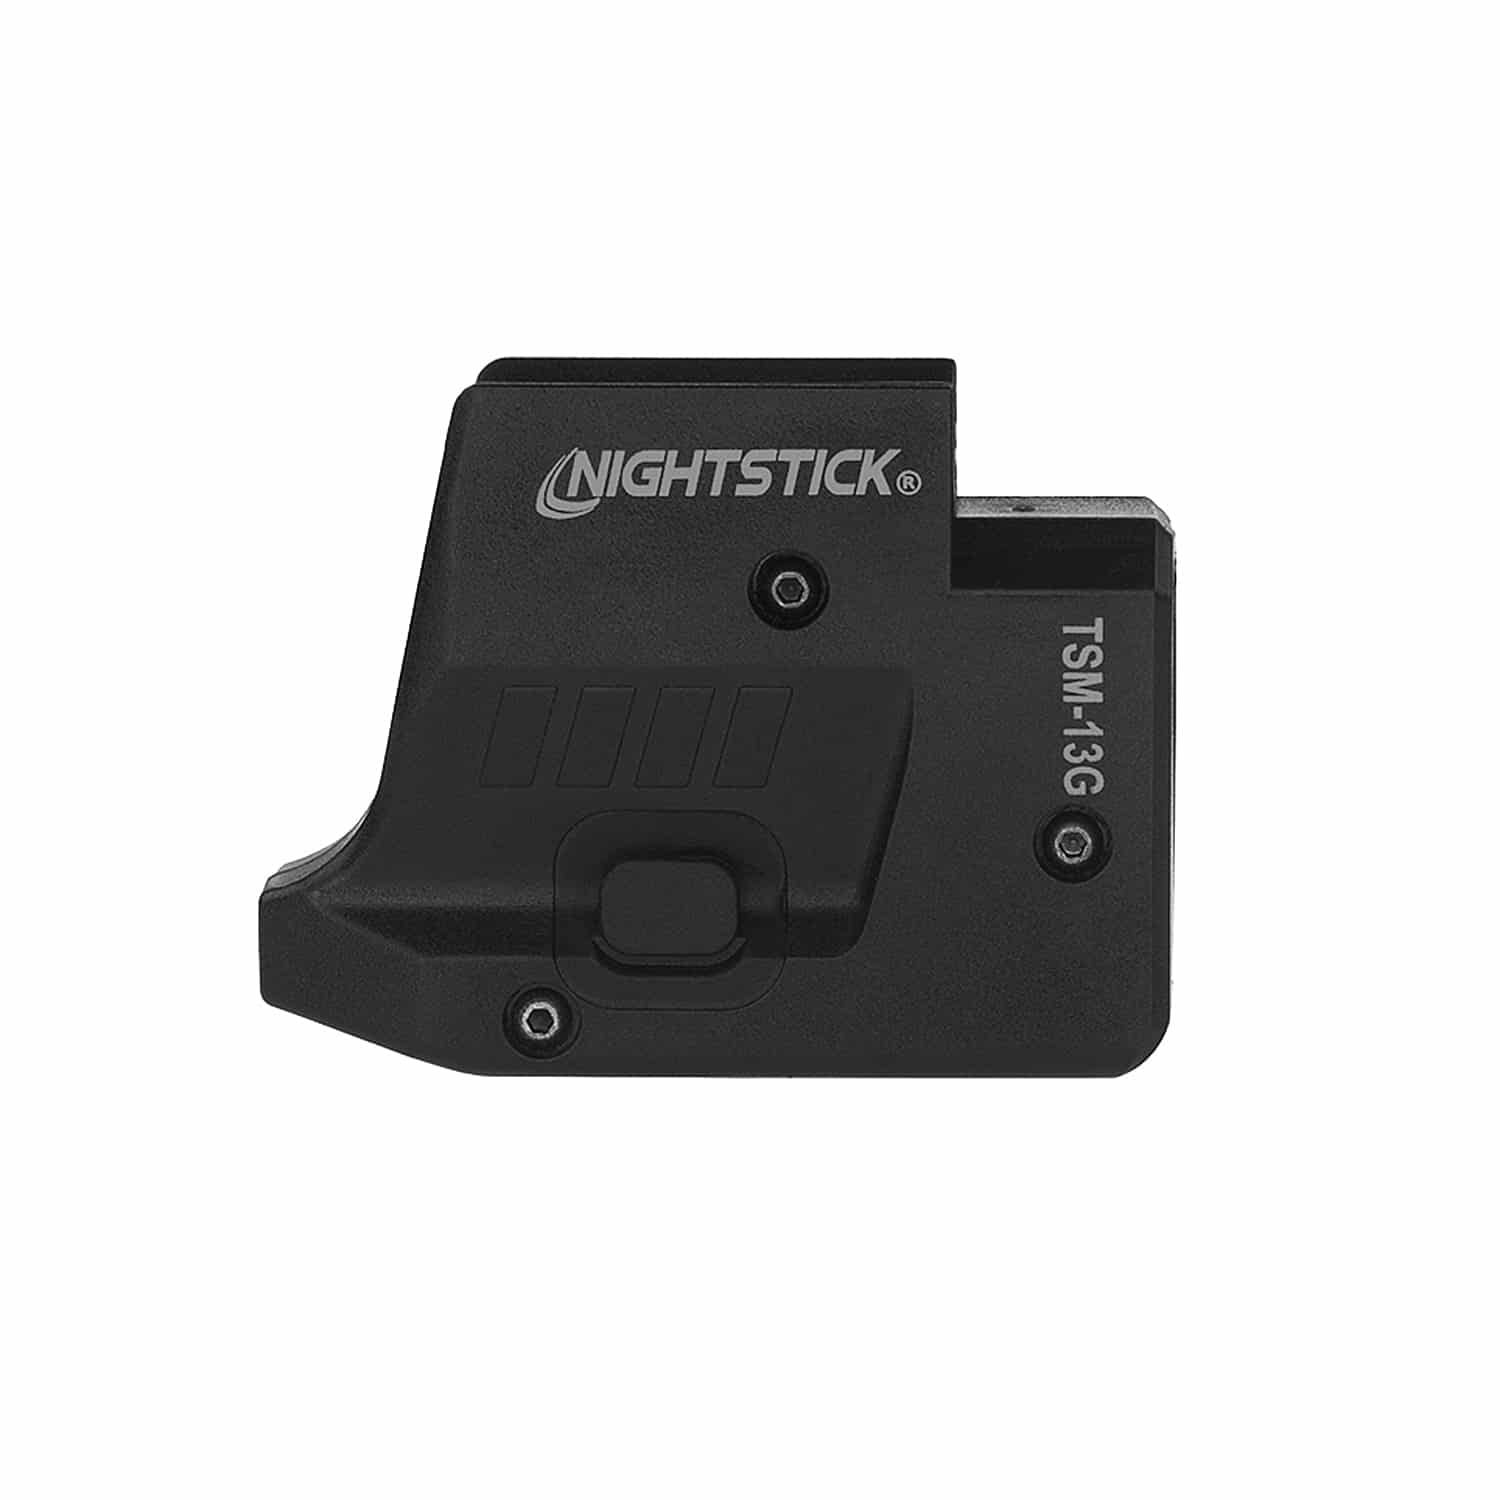 Nightstick TSM-13G Subcompact Weapon Light with Green Laser ...